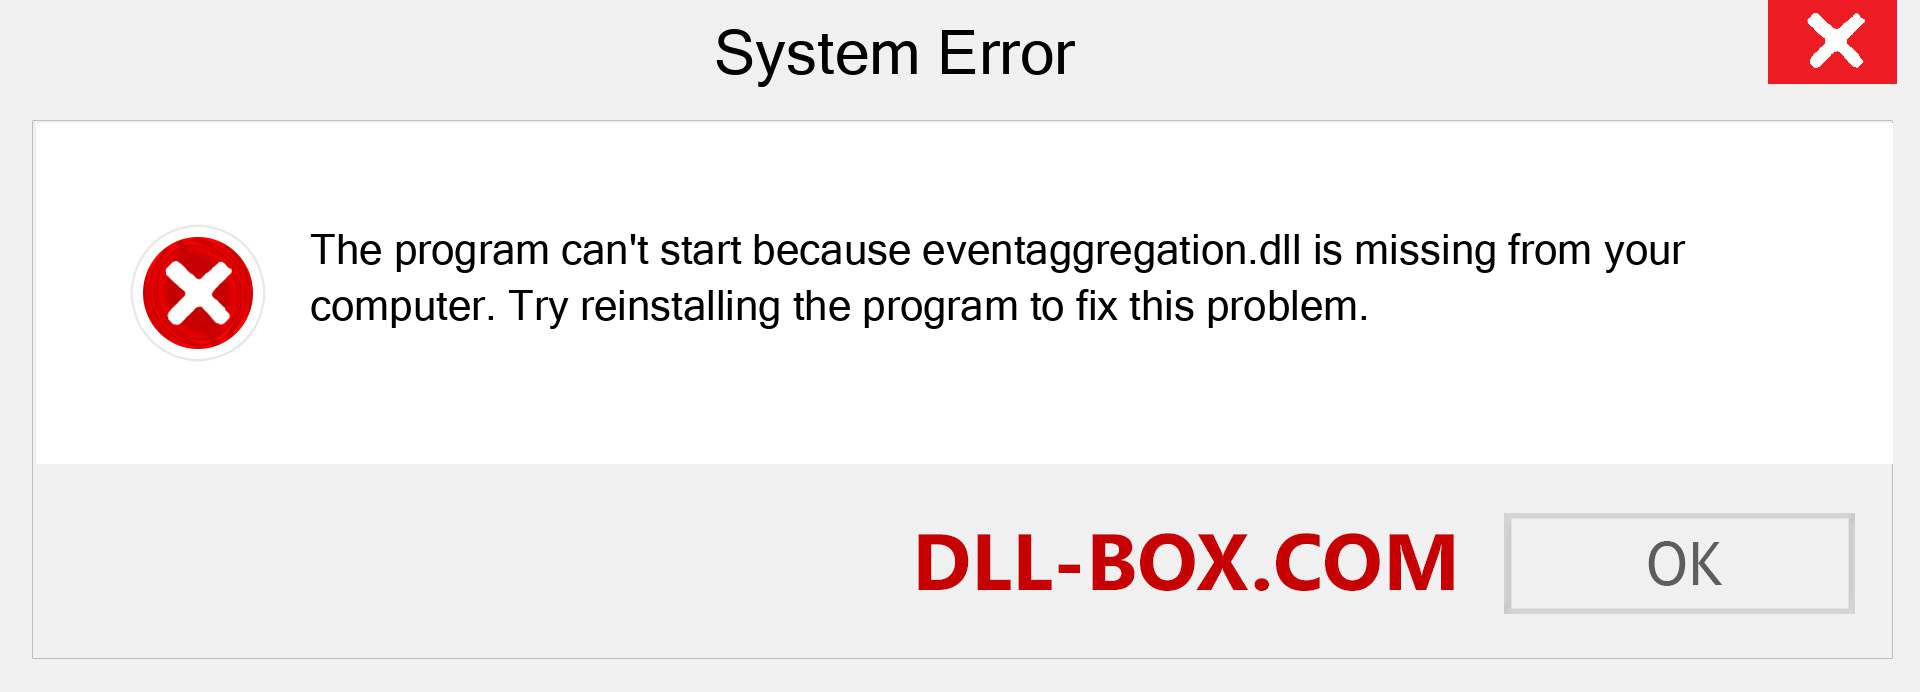  eventaggregation.dll file is missing?. Download for Windows 7, 8, 10 - Fix  eventaggregation dll Missing Error on Windows, photos, images